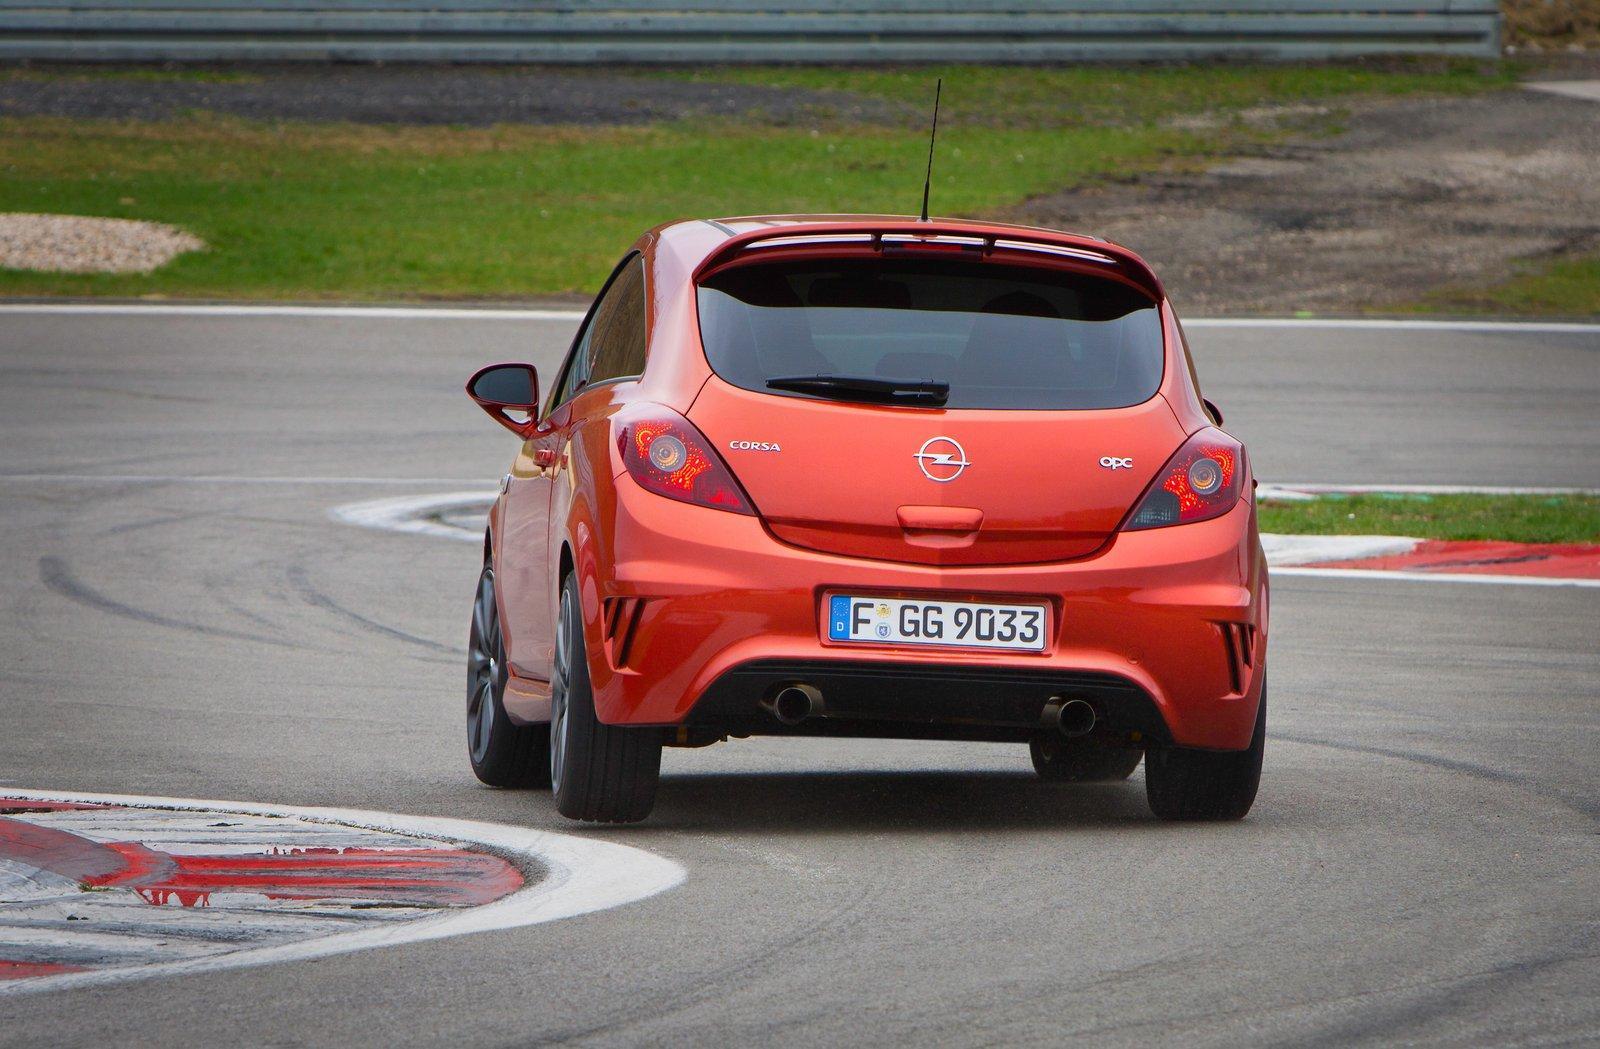 Opel Corsa OPC Nurburgring Edition are acum 210 CP, iar demarajul 0-100 km/h se face in 6,8 secunde